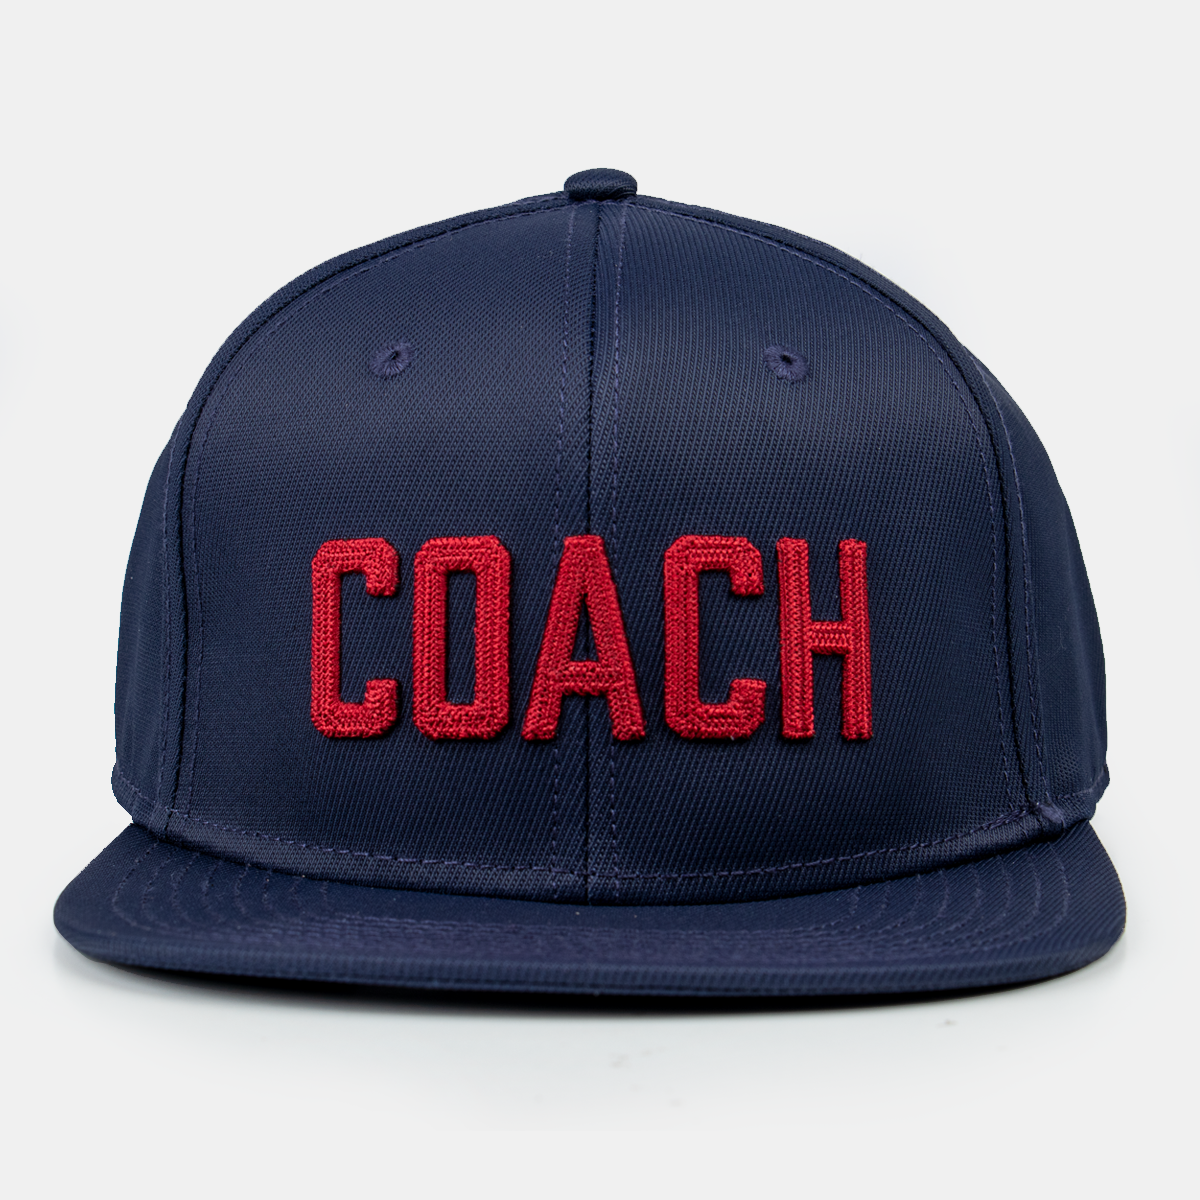 The Coach Hat